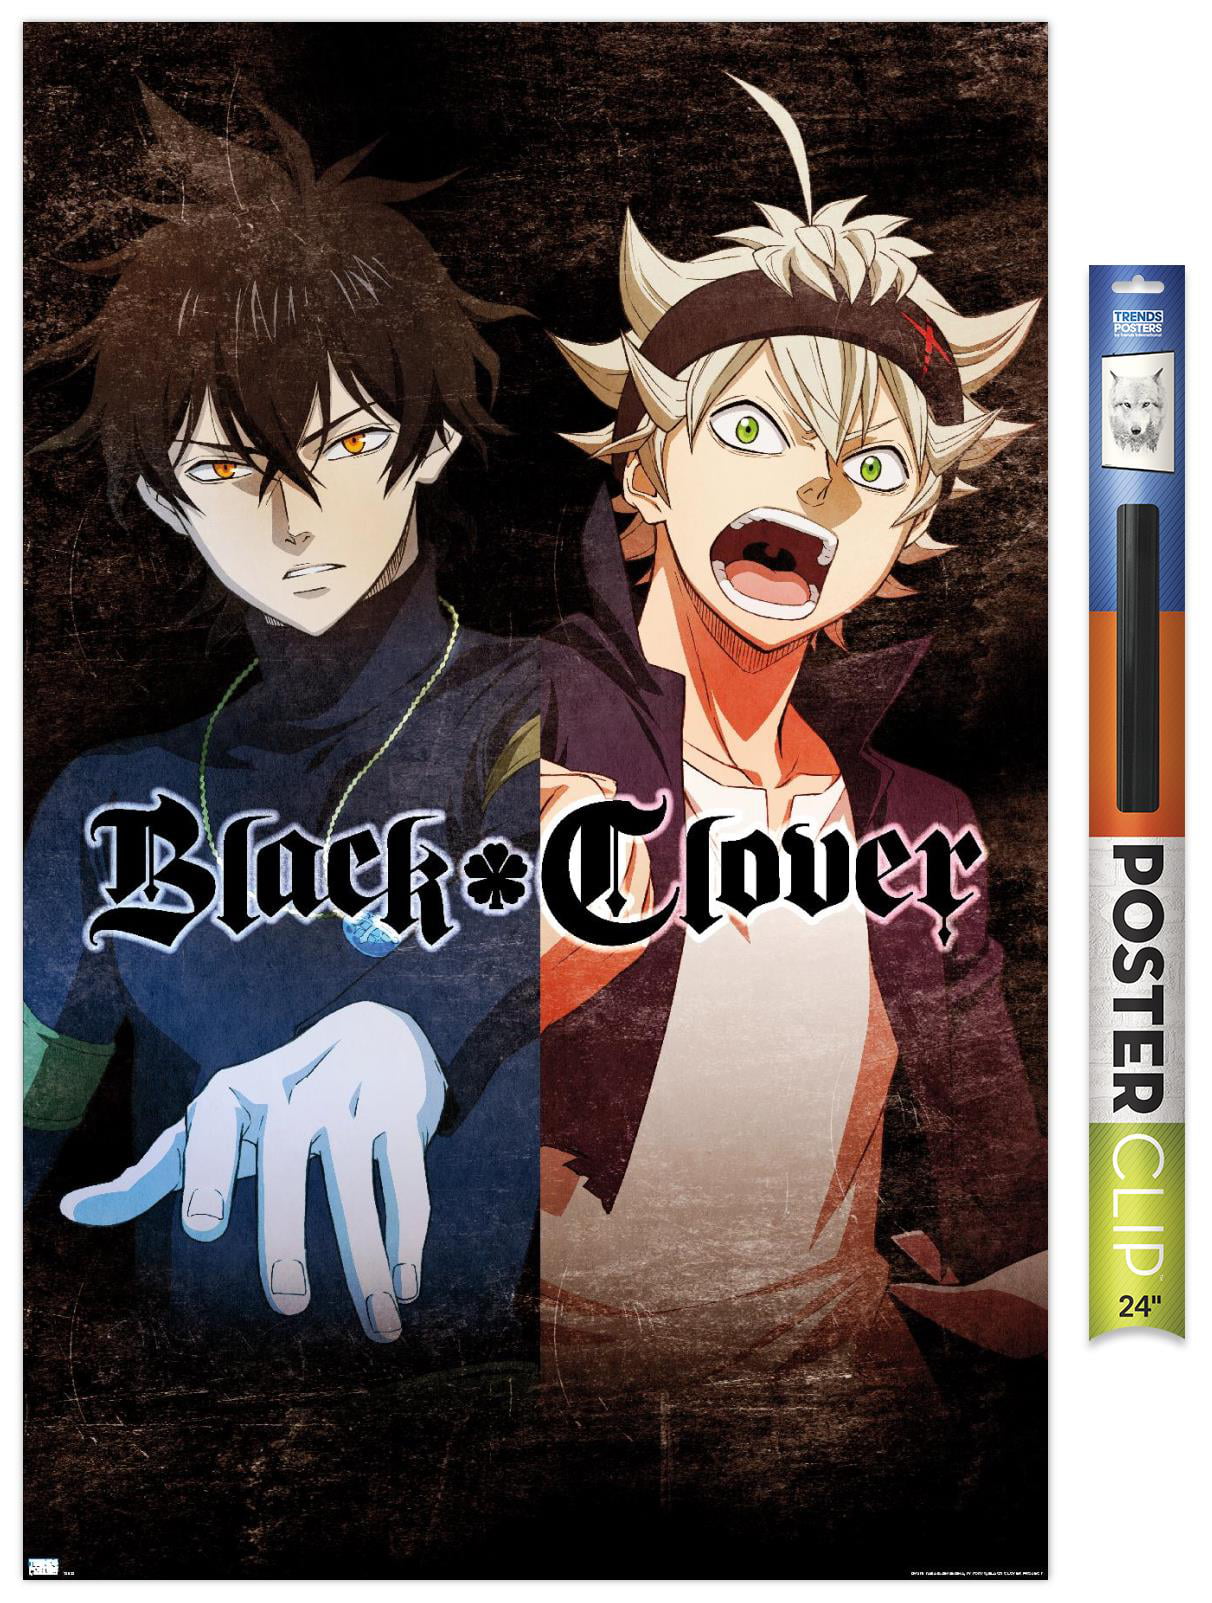 Black Clover Anime Greeting Cards for Sale